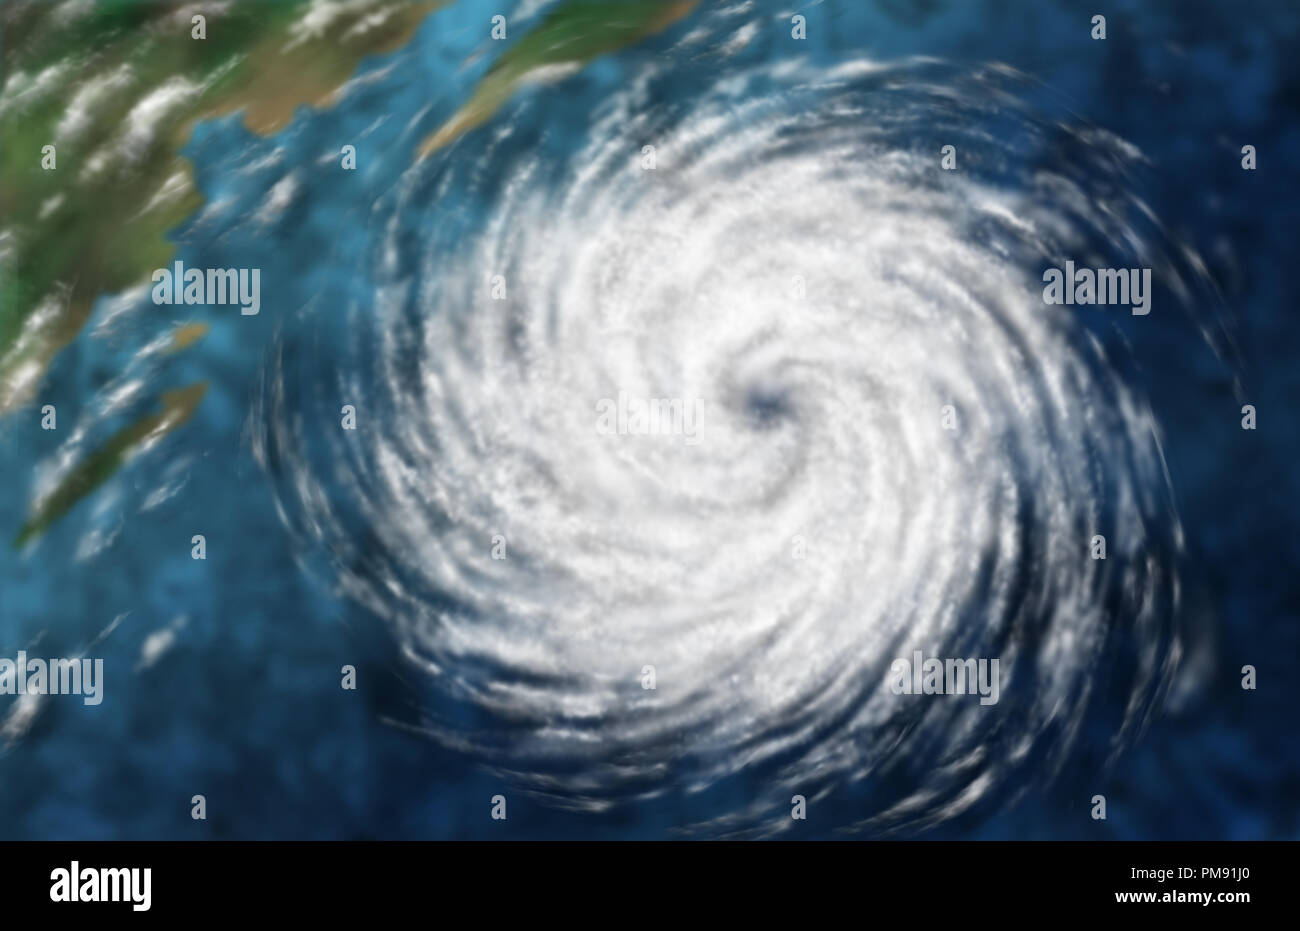 Hurricane as a dangerous natural disaster weather system off an ocean coast in a 3D illustration style. Stock Photo